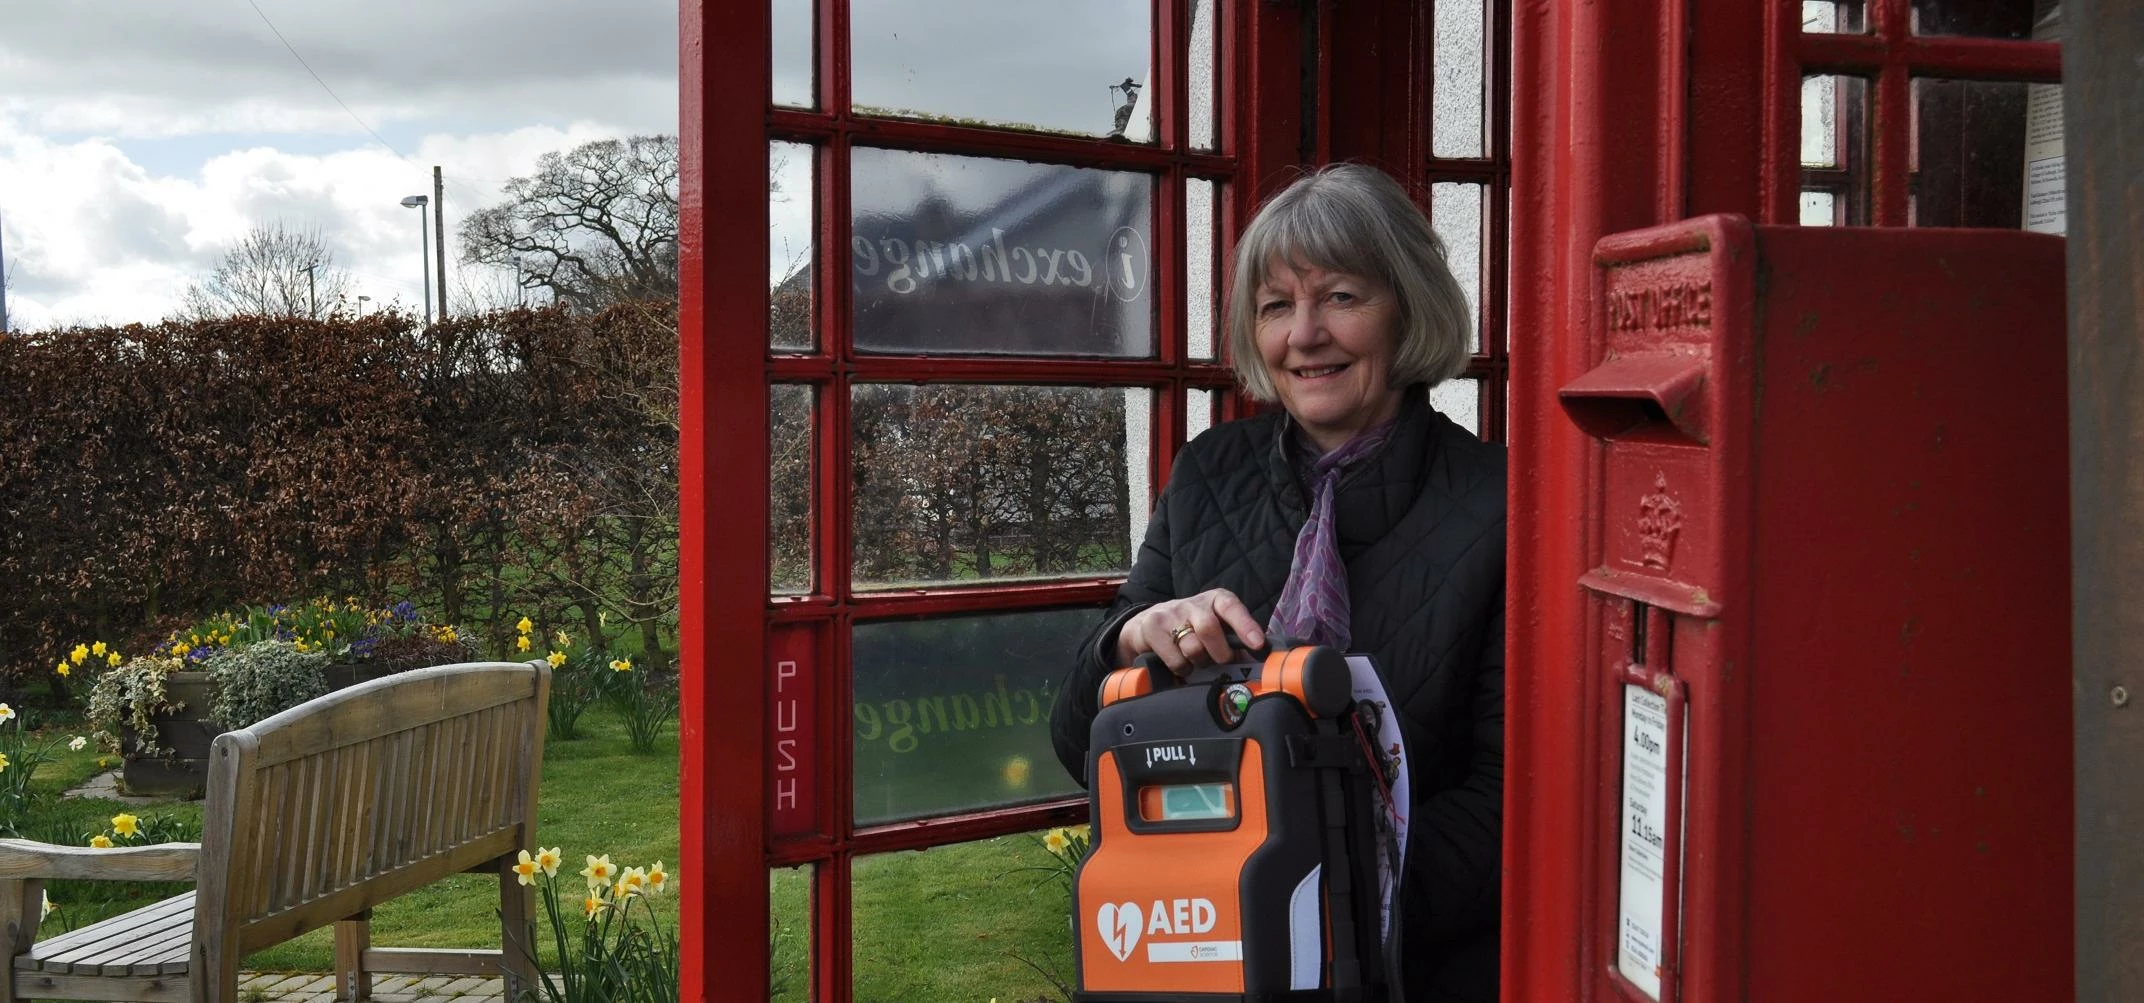 Sheila Campbell with one of four new defibs from Cardiac Science for her remote communities in the S